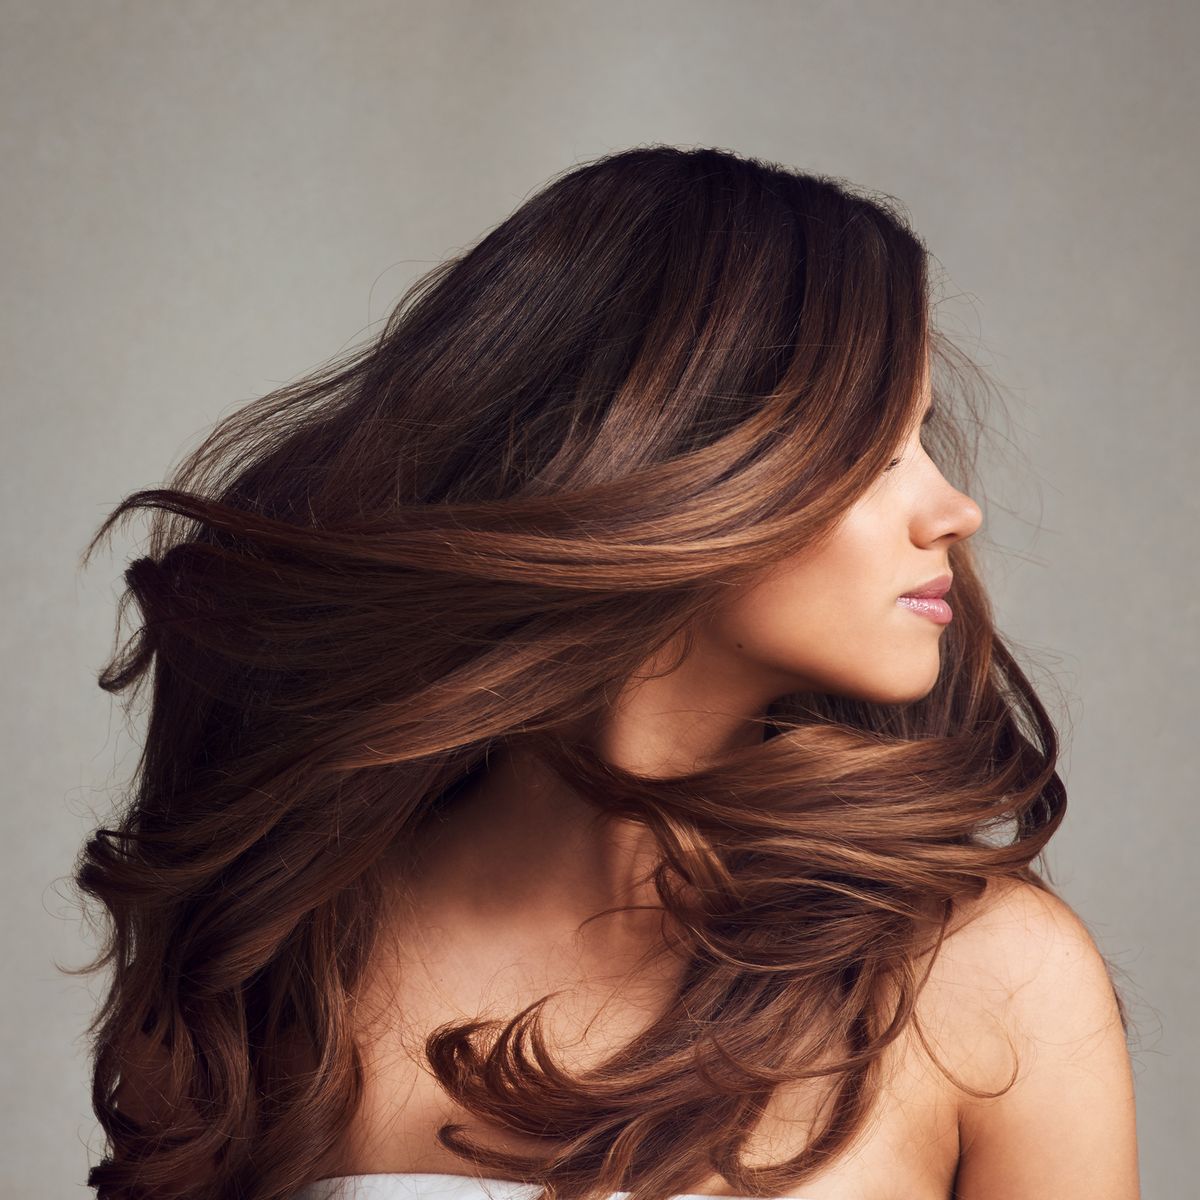 Nyttig reaktion Turbine How to Use Dry Shampoo: 10 Expert Tips to Know